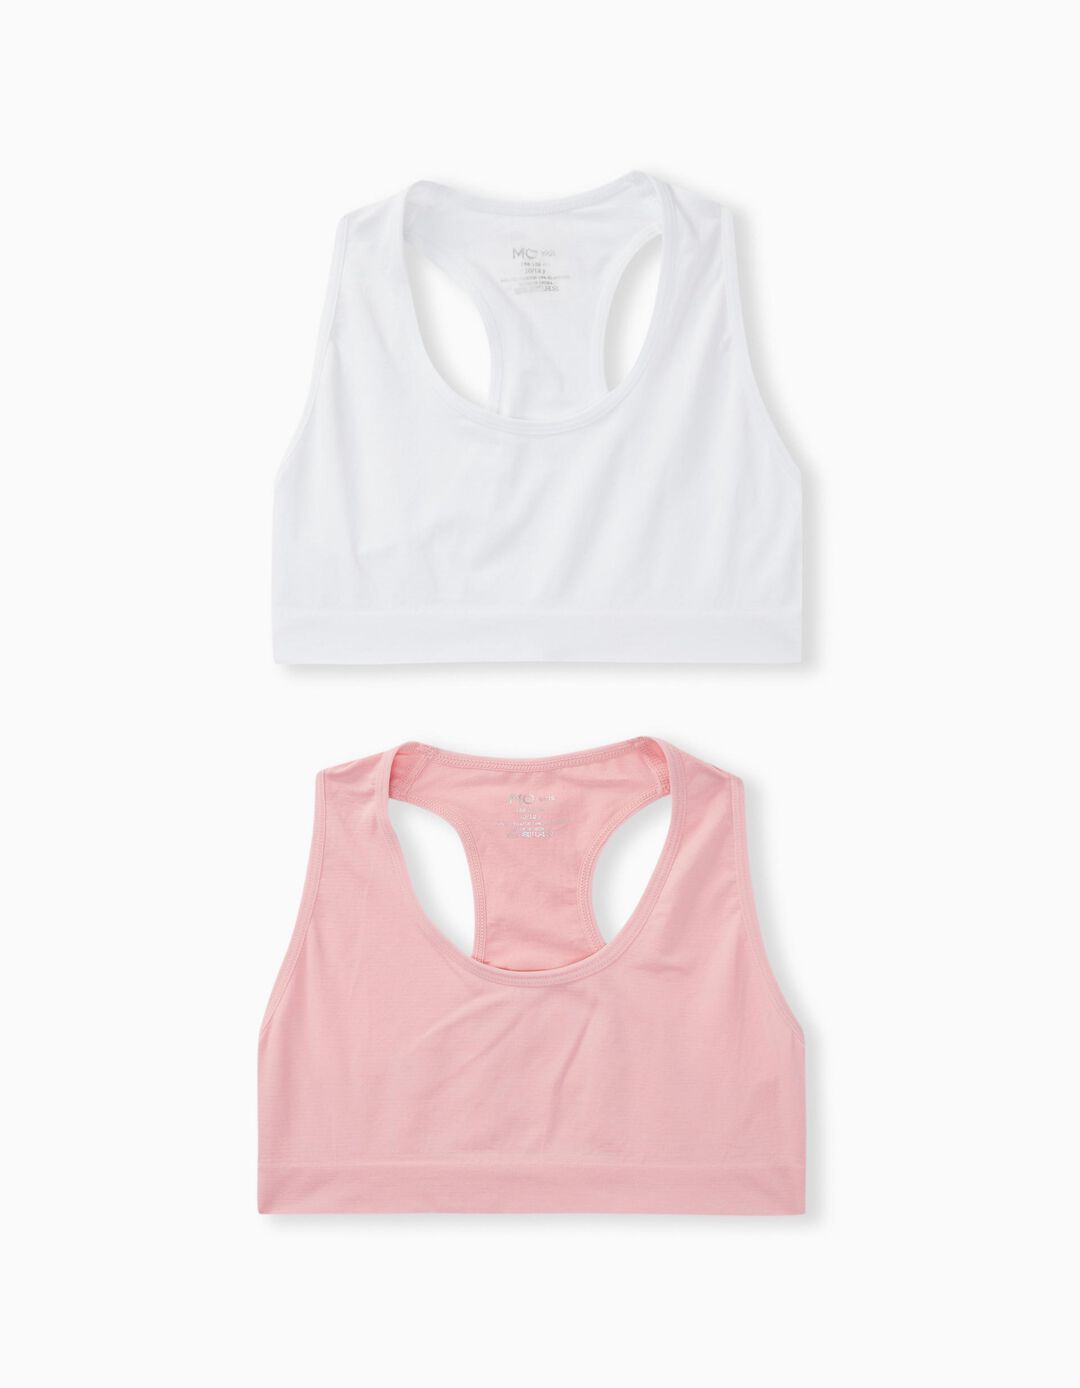 2 Sports Tops Pack, Girls, Multicolour